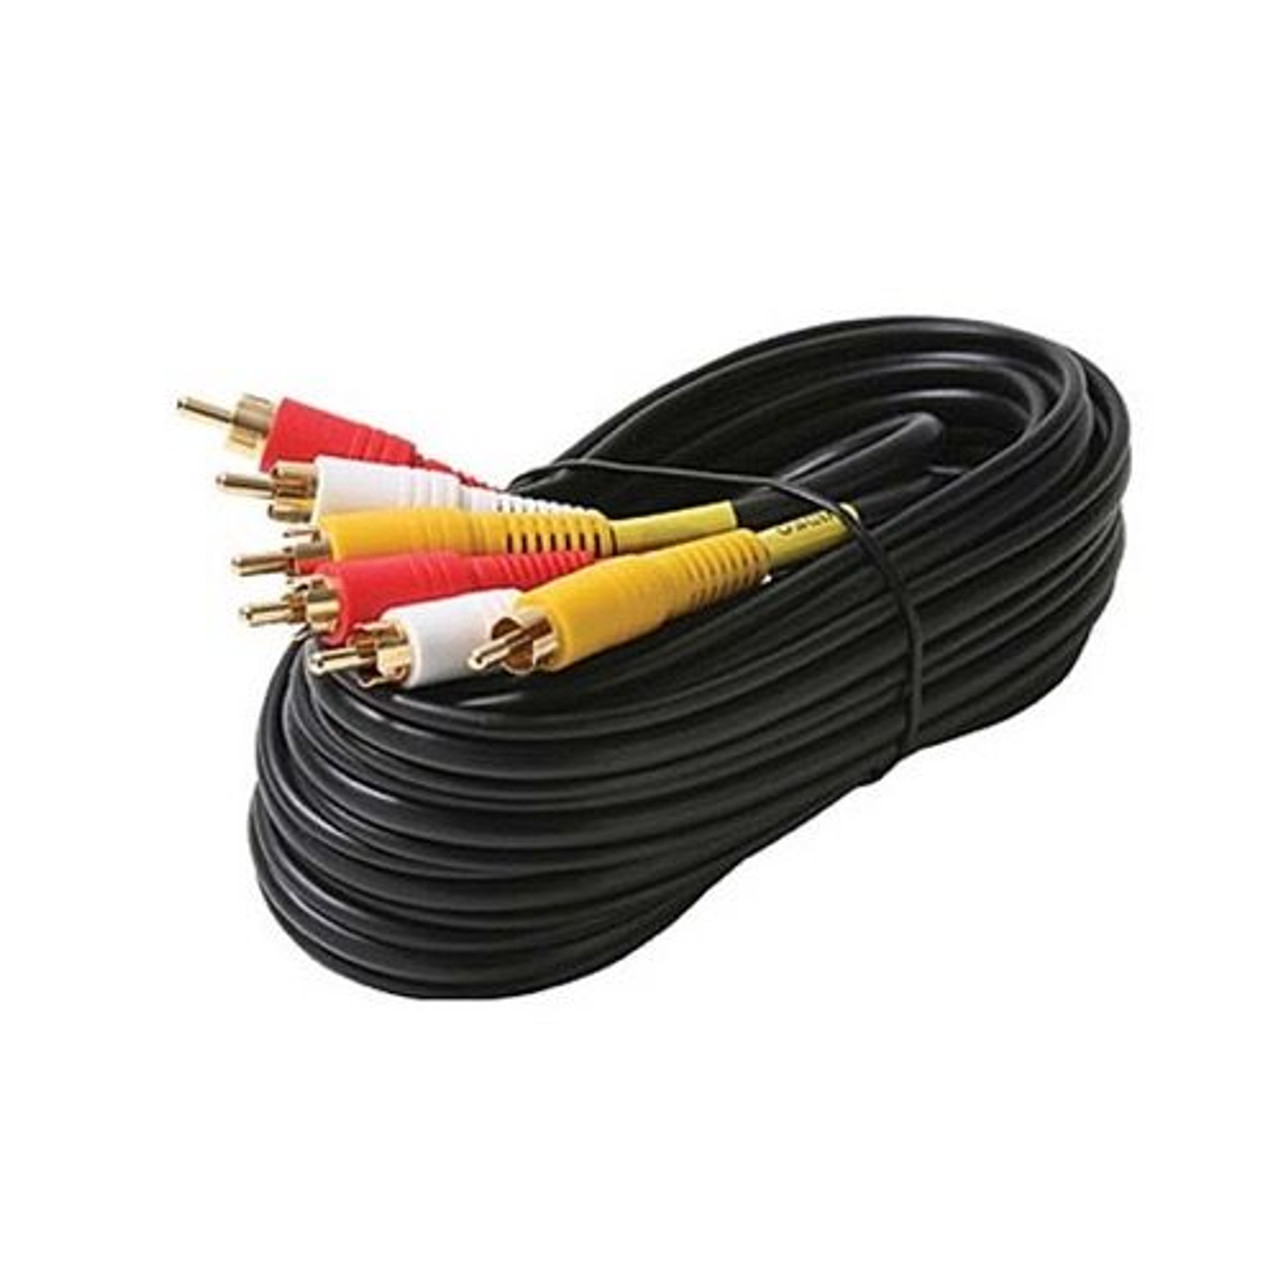 Steren 216-312BK 12' FT 3-RCA Cable Triple Red/Yellow/White Male to Male Dubbing Audio Video Composite Cable Gold Plate DIRECTV A/V Stereo Shielded Digital Signal DVD VCR Hook-Up Jumper with Plug Connectors, Part # 216312-BK